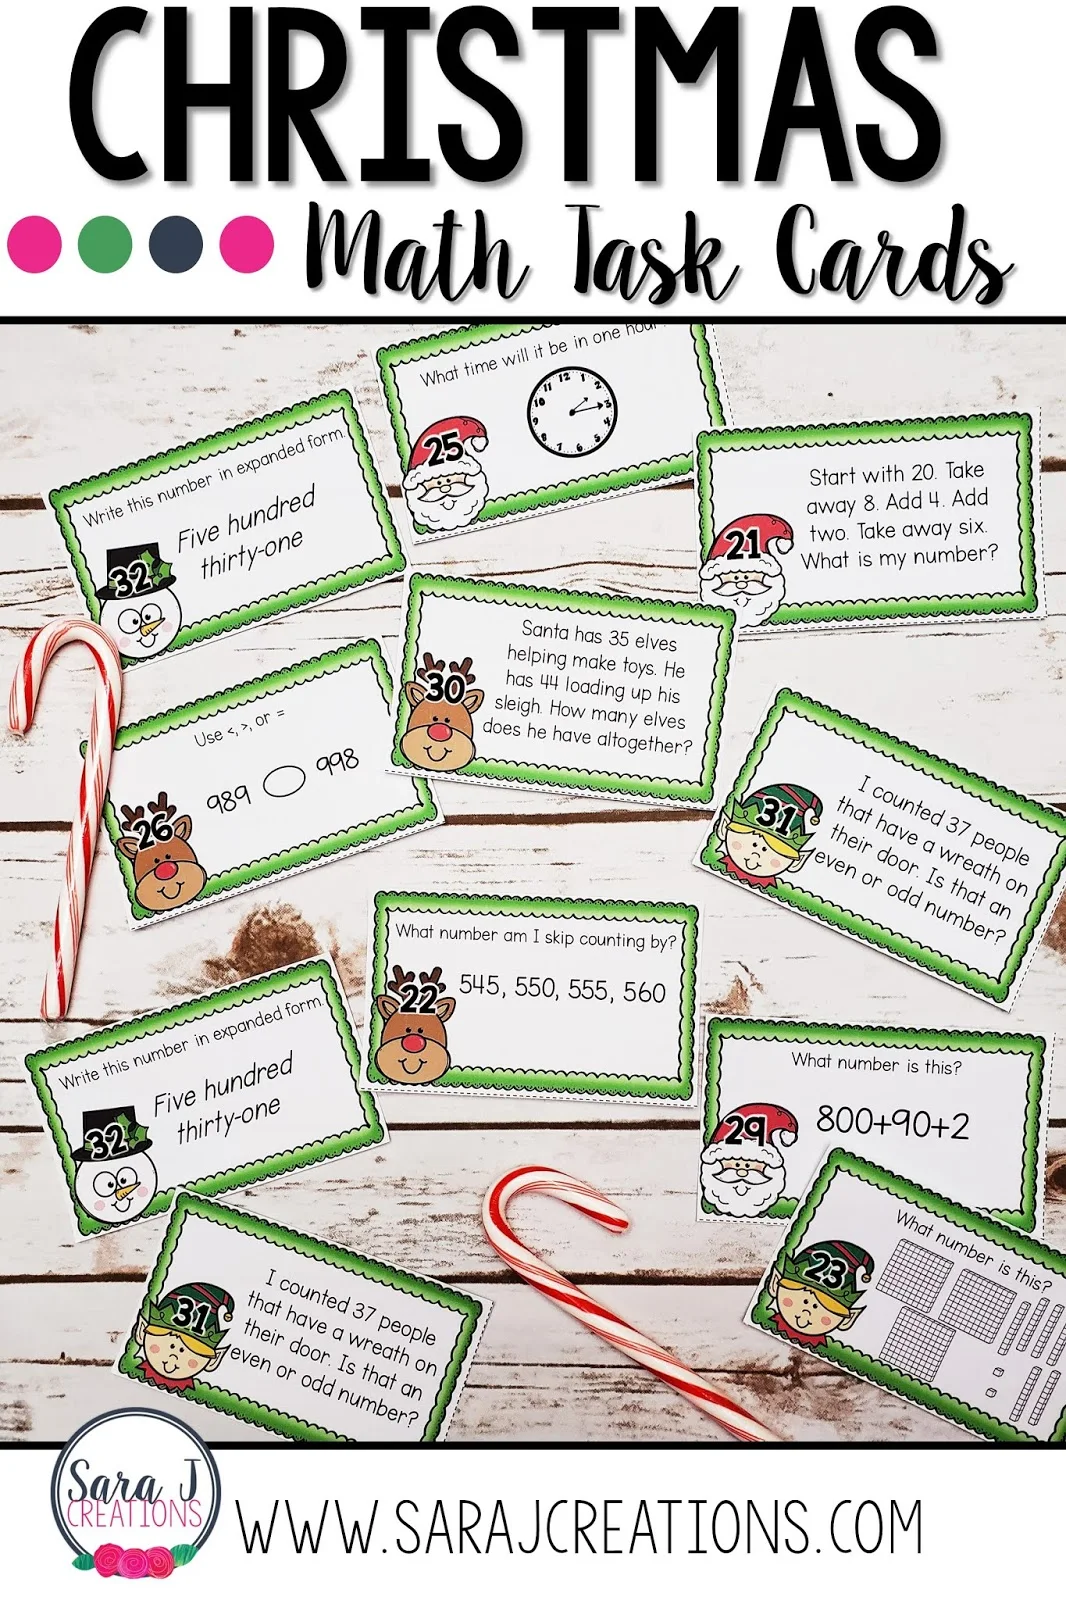 Christmas math task cards are SO fun for reviewing a variety of topics. From place value, to time and money, to addition and subtraction, to story problems all with a fun Christmas theme! Designed for second grade but could work for third grade too!